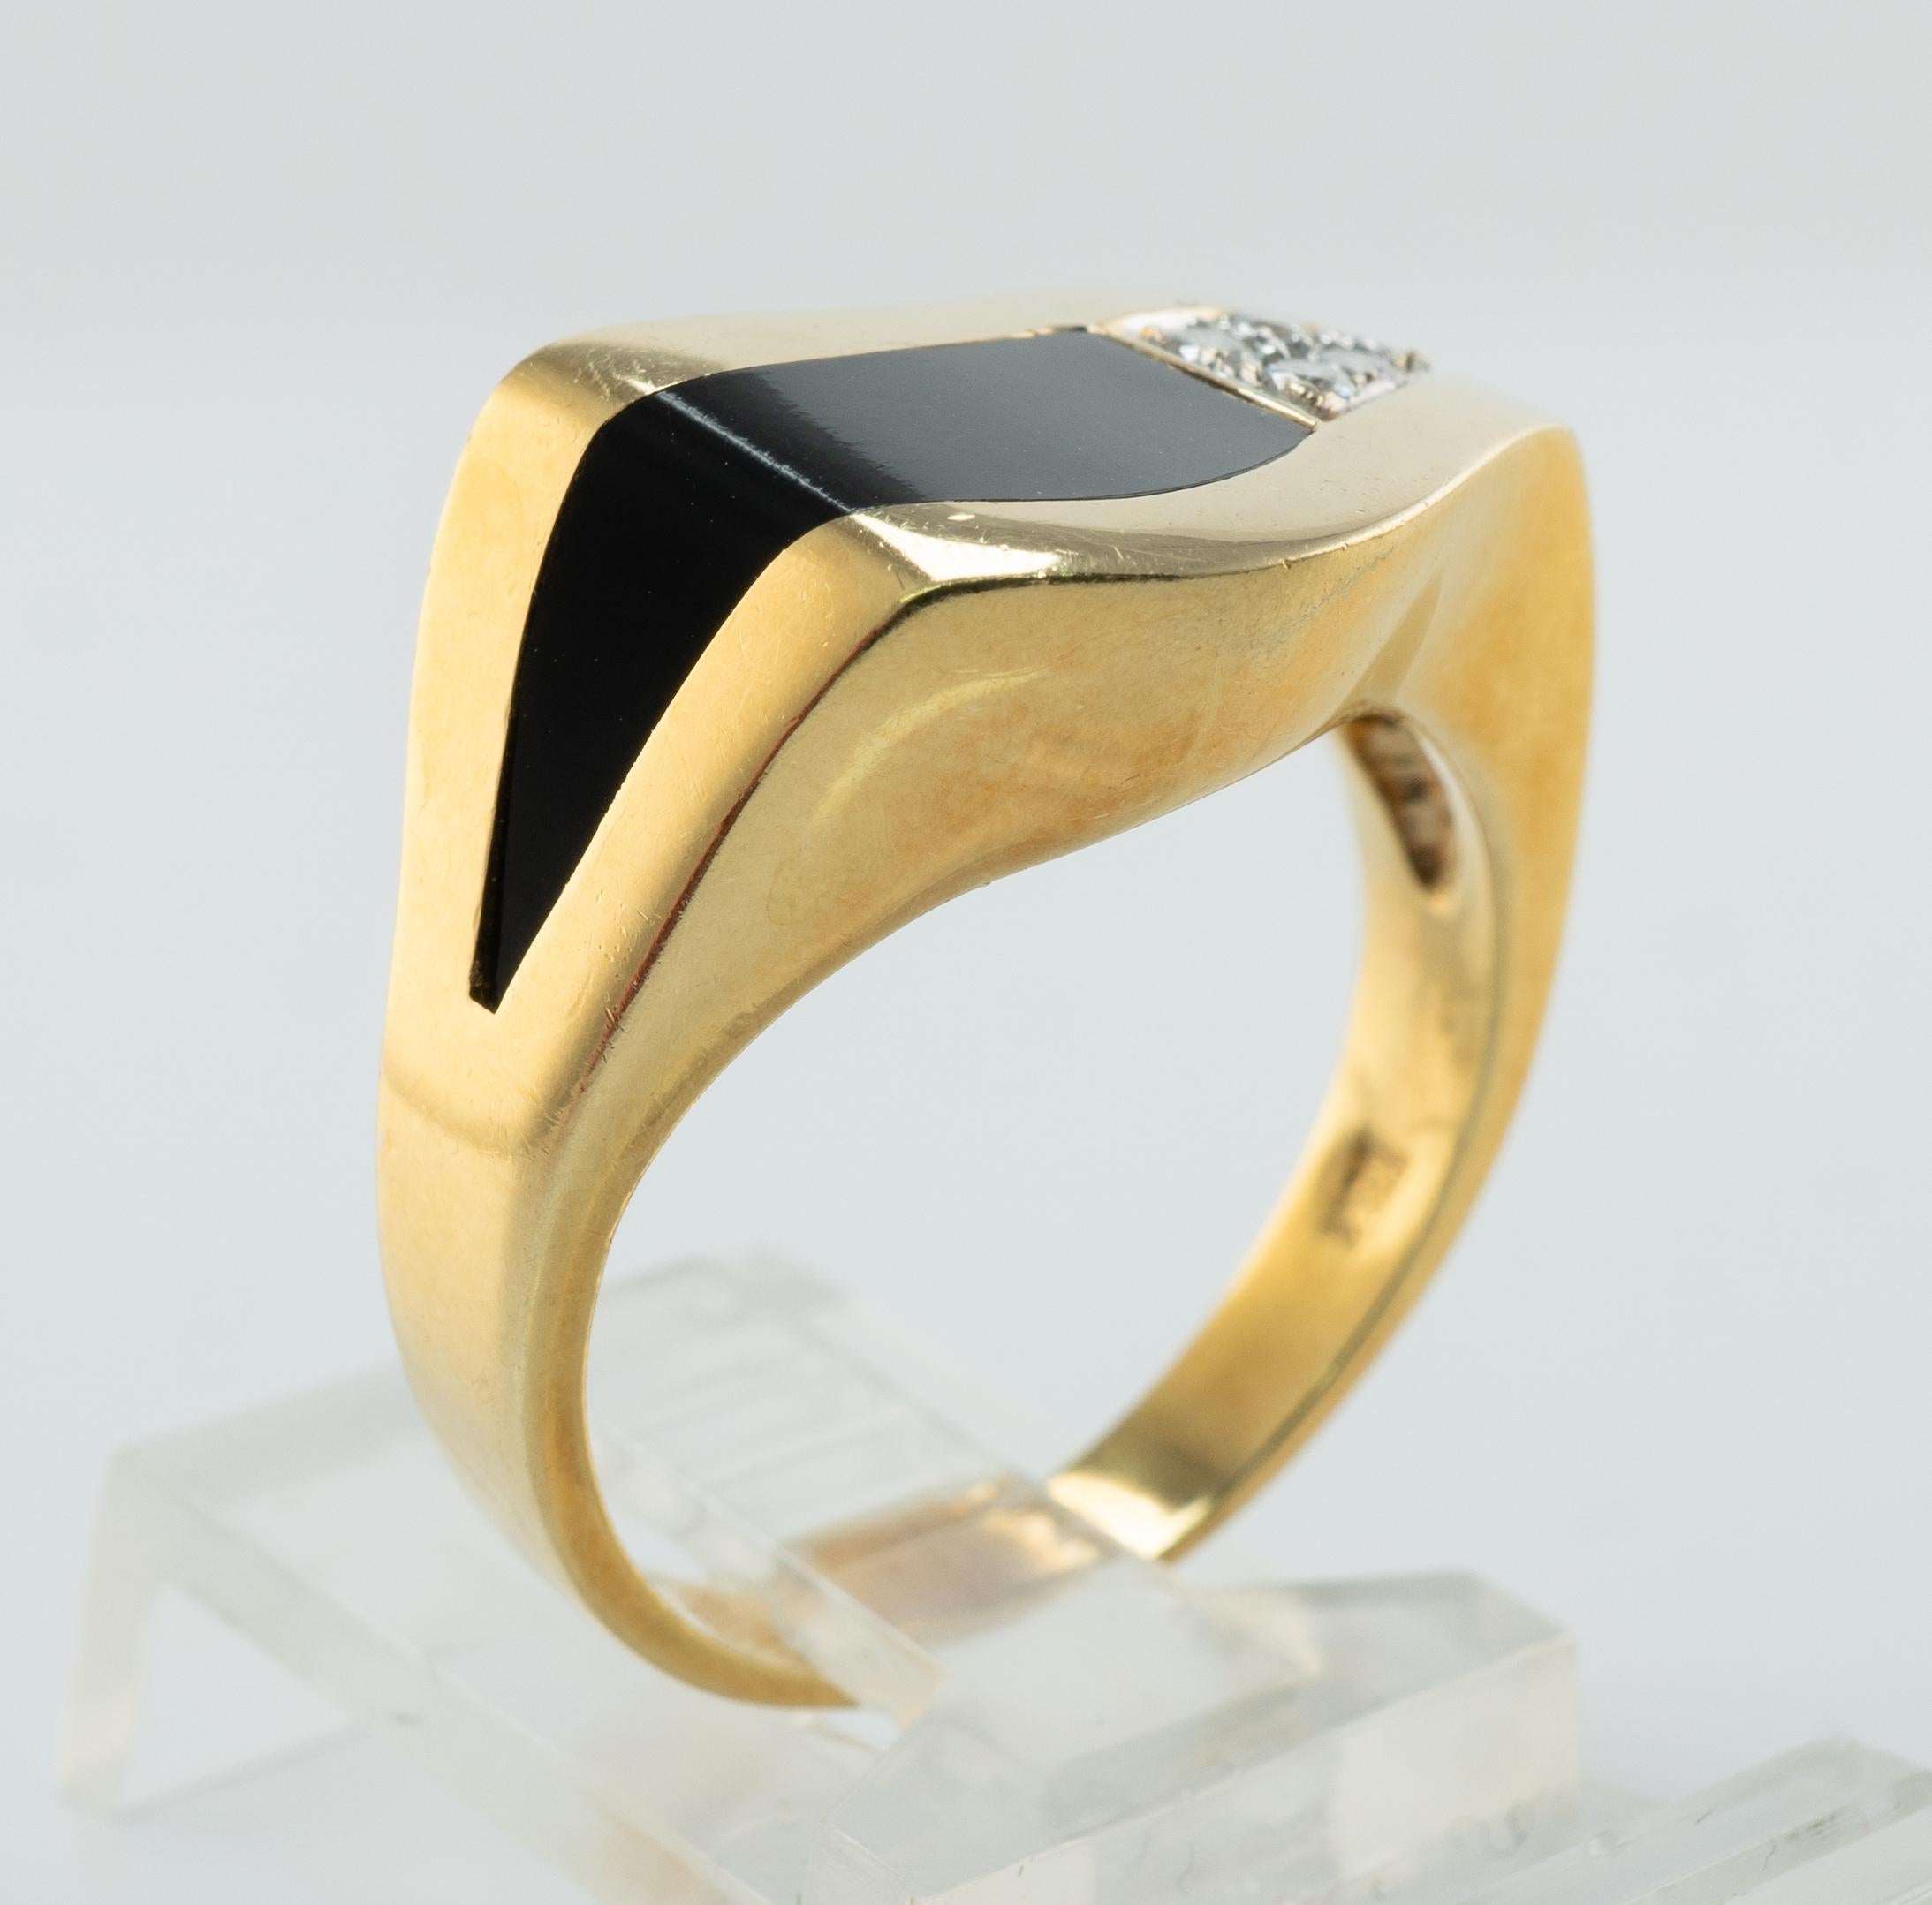 Mens Natural Diamond Onyx Ring 18K Gold Band

This amazing vintage ring for a gentleman is finely crafted in solid 18K Yellow Gold.
The ring is set with natural Black Onyx and diamonds.
Five (5) diamonds total .15 carat of VS1 clarity and G